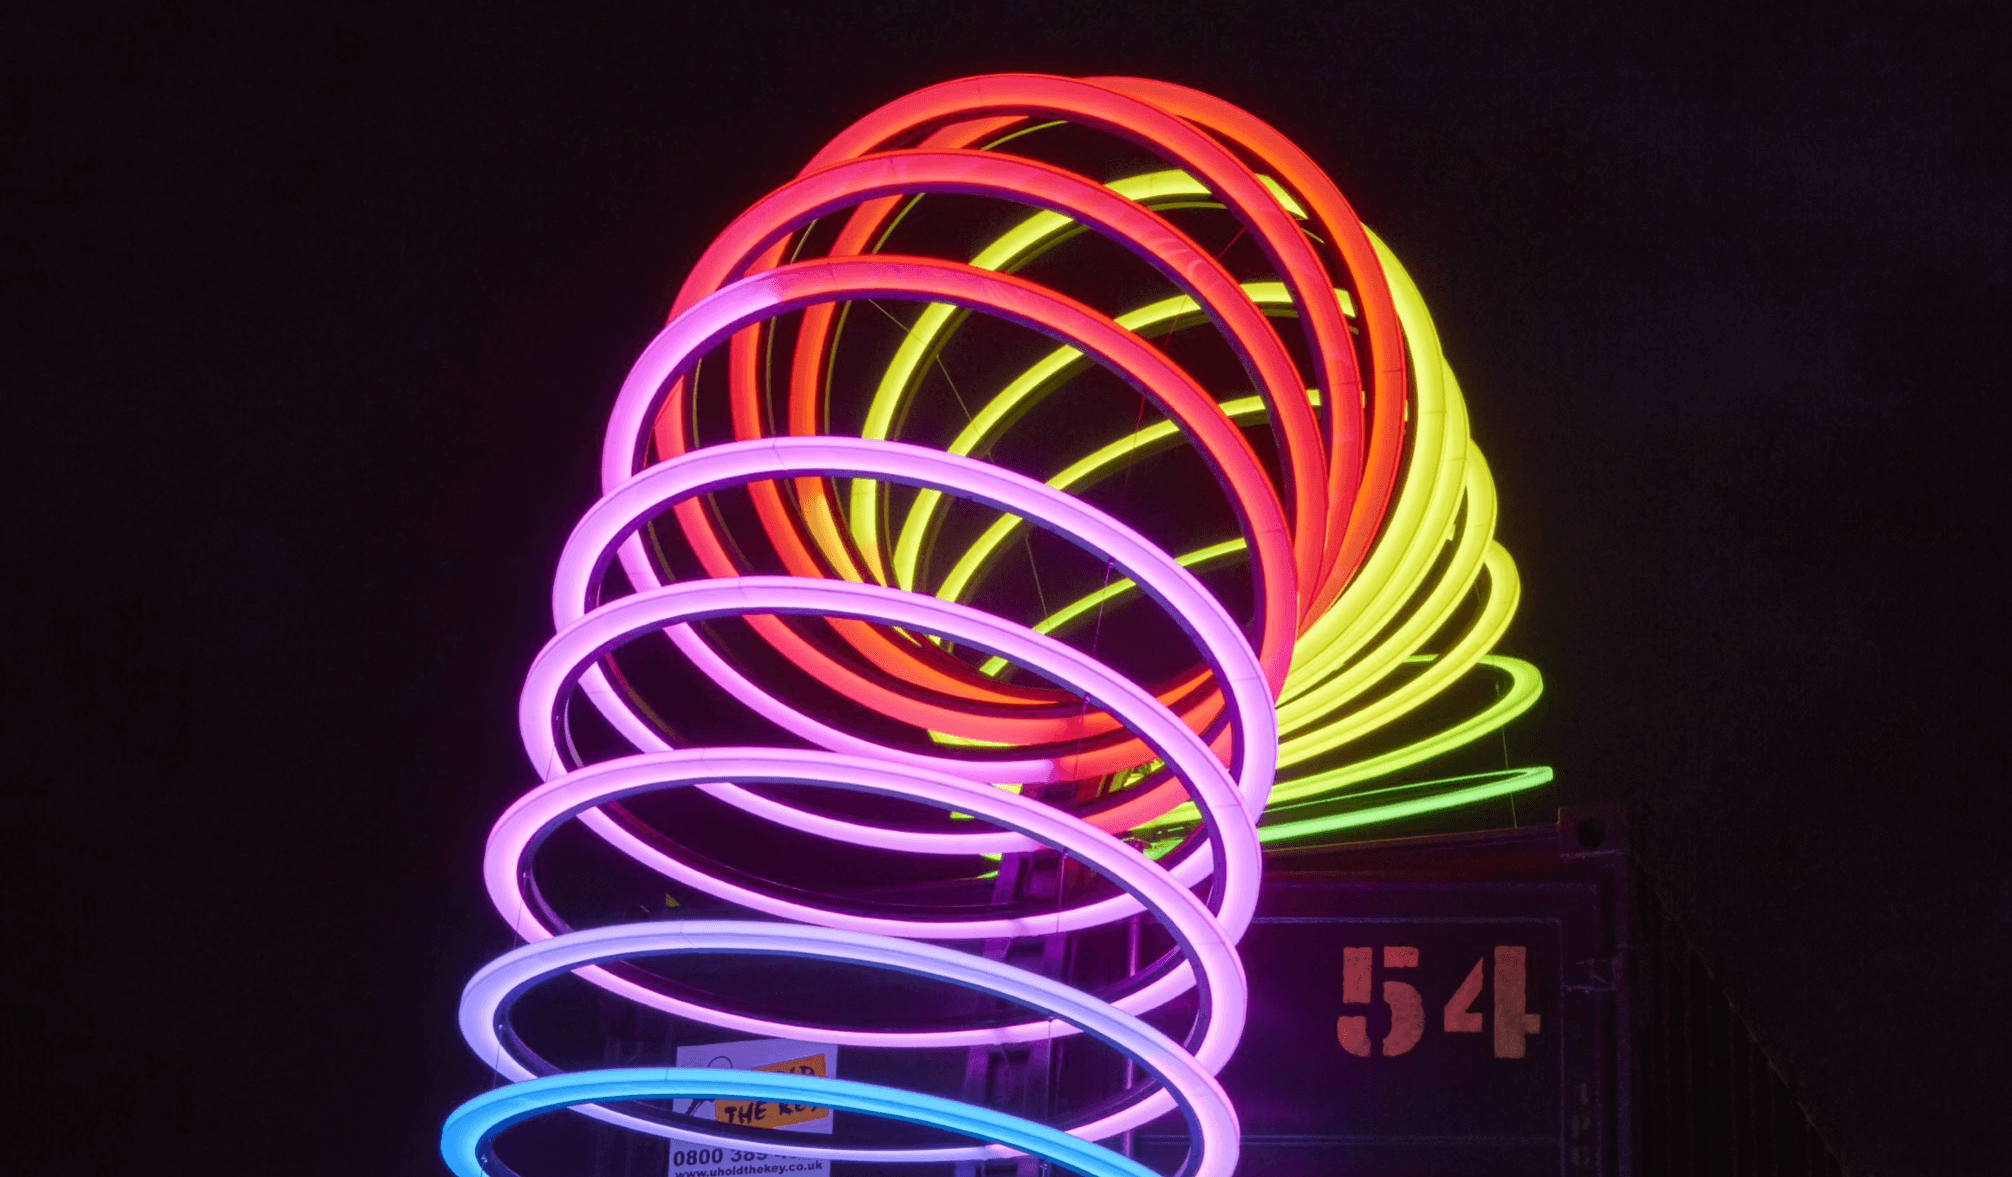 An illuminated sculpture of a large slinky-like spring is bended and sits on on top of a large, metal container – this piece feature at Durham Lumiere’s light.